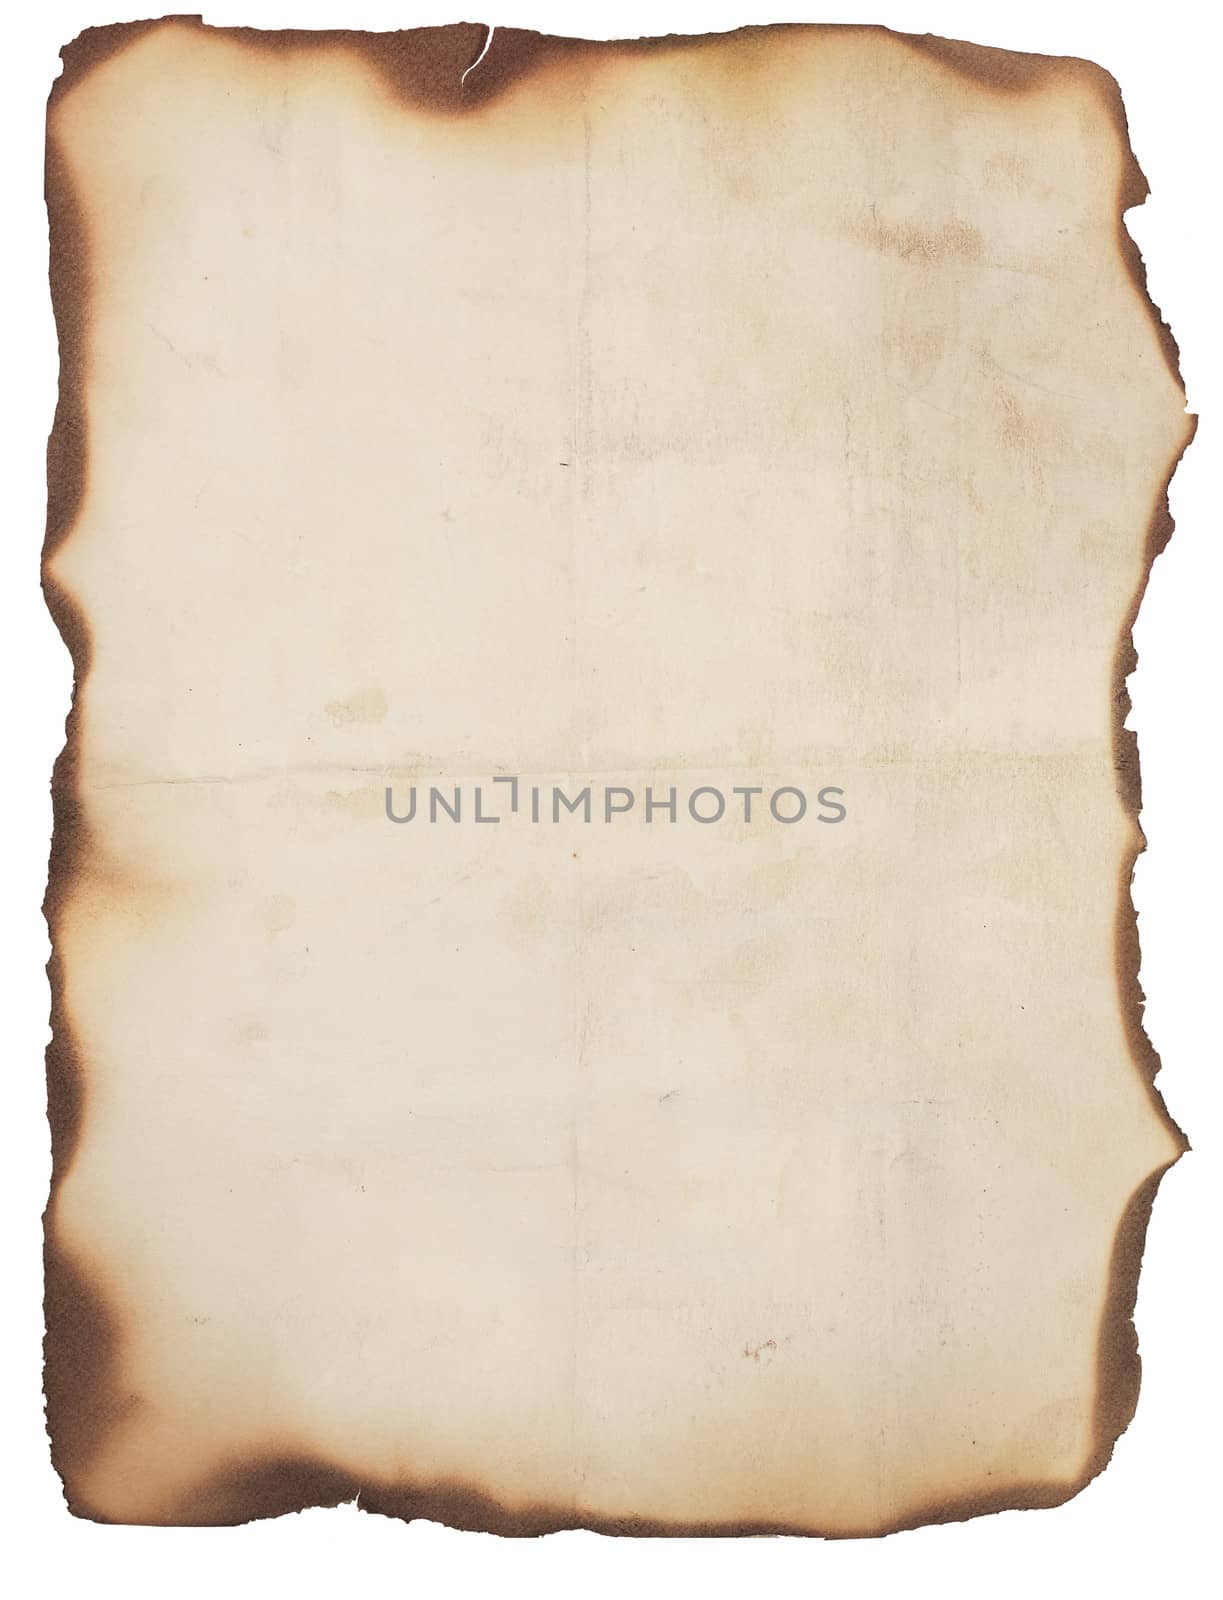 Old, creased and smudged paper with fire damaged and burned edges. Blank with room for text or images. Isolated on white.